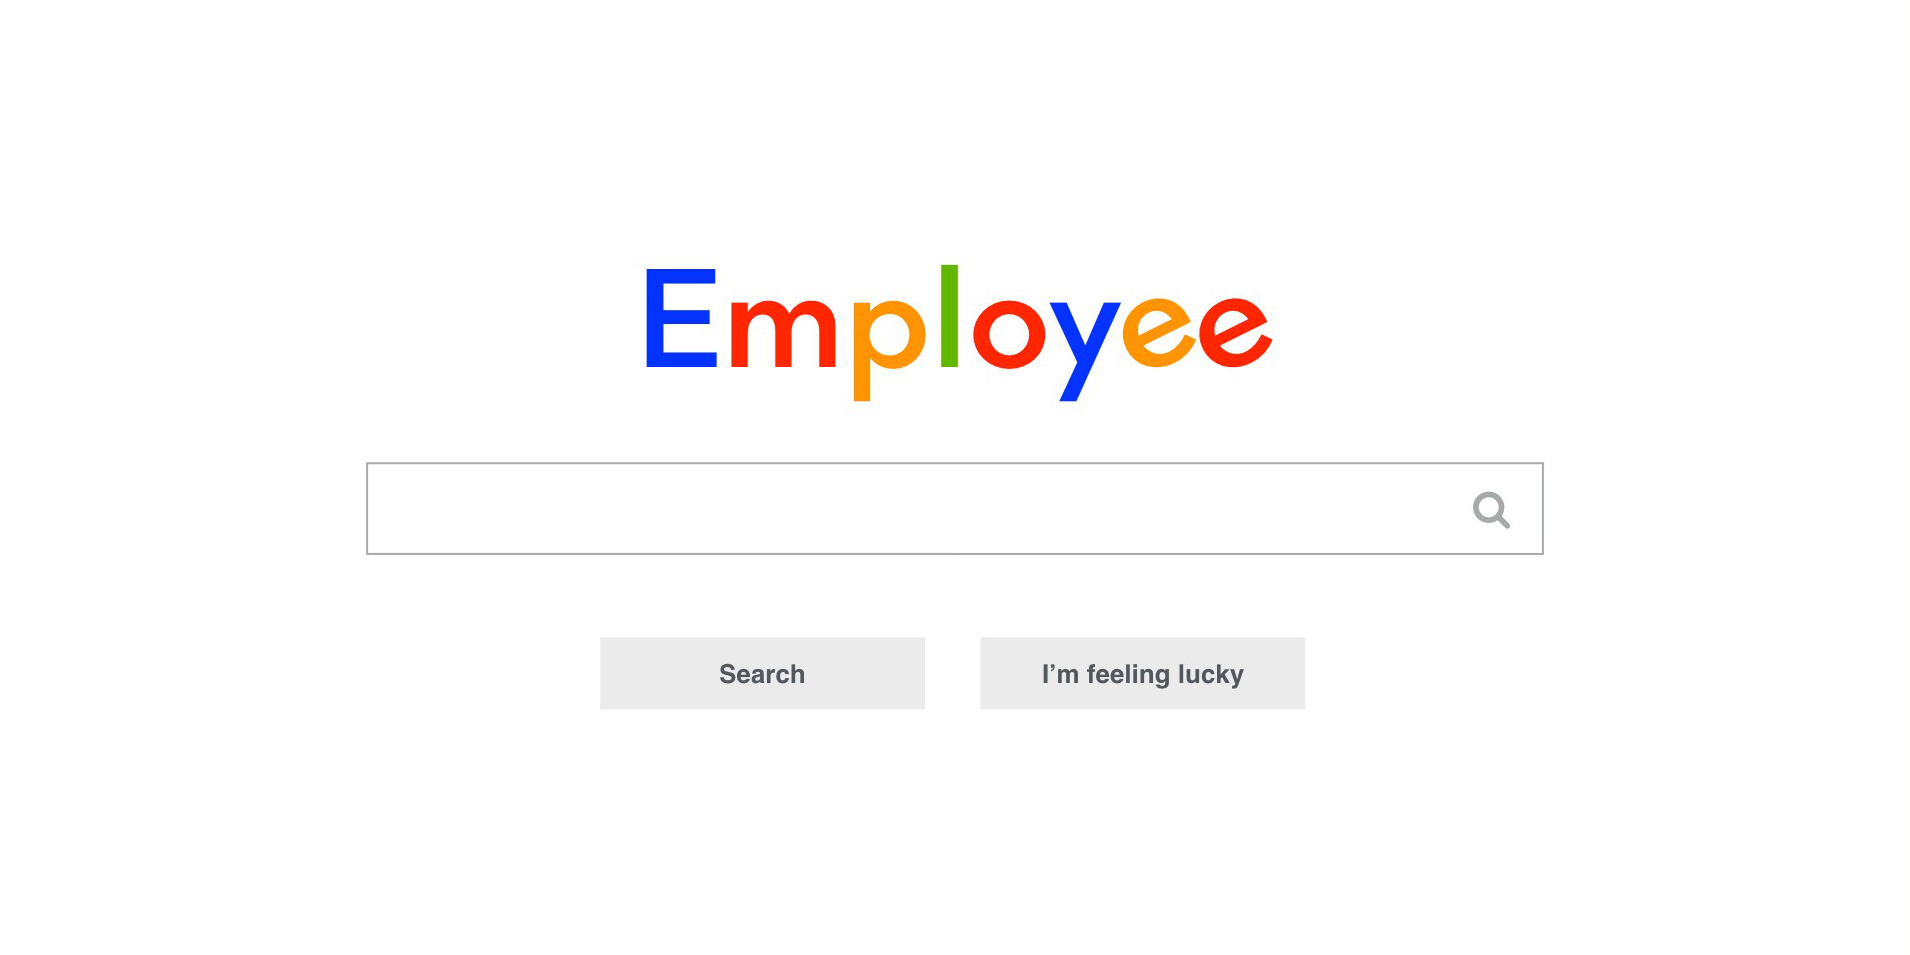 Employee search bar with two buttons Search and I'm feeling lucky buttons